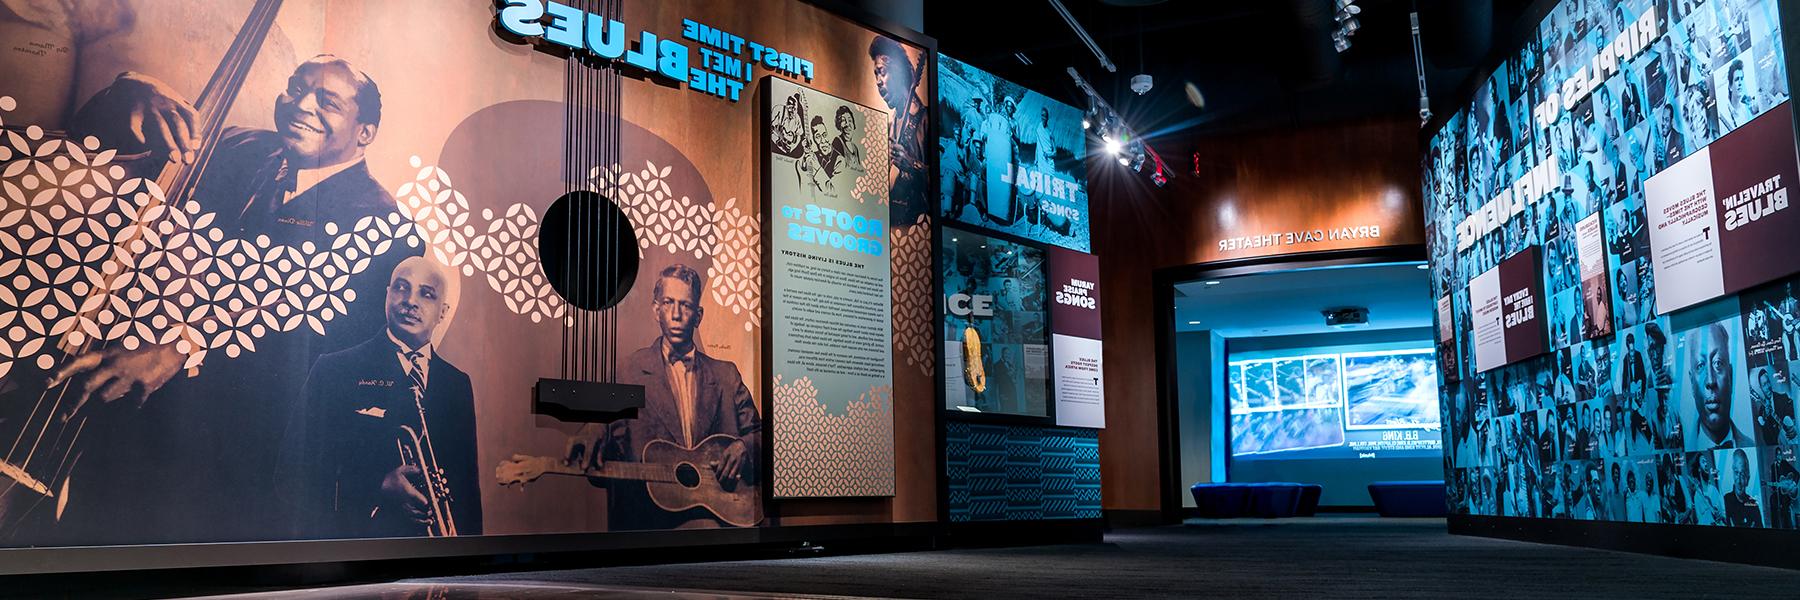 The National Blues Museum in St. 路易, Missouri, part of America's Music Corridor.